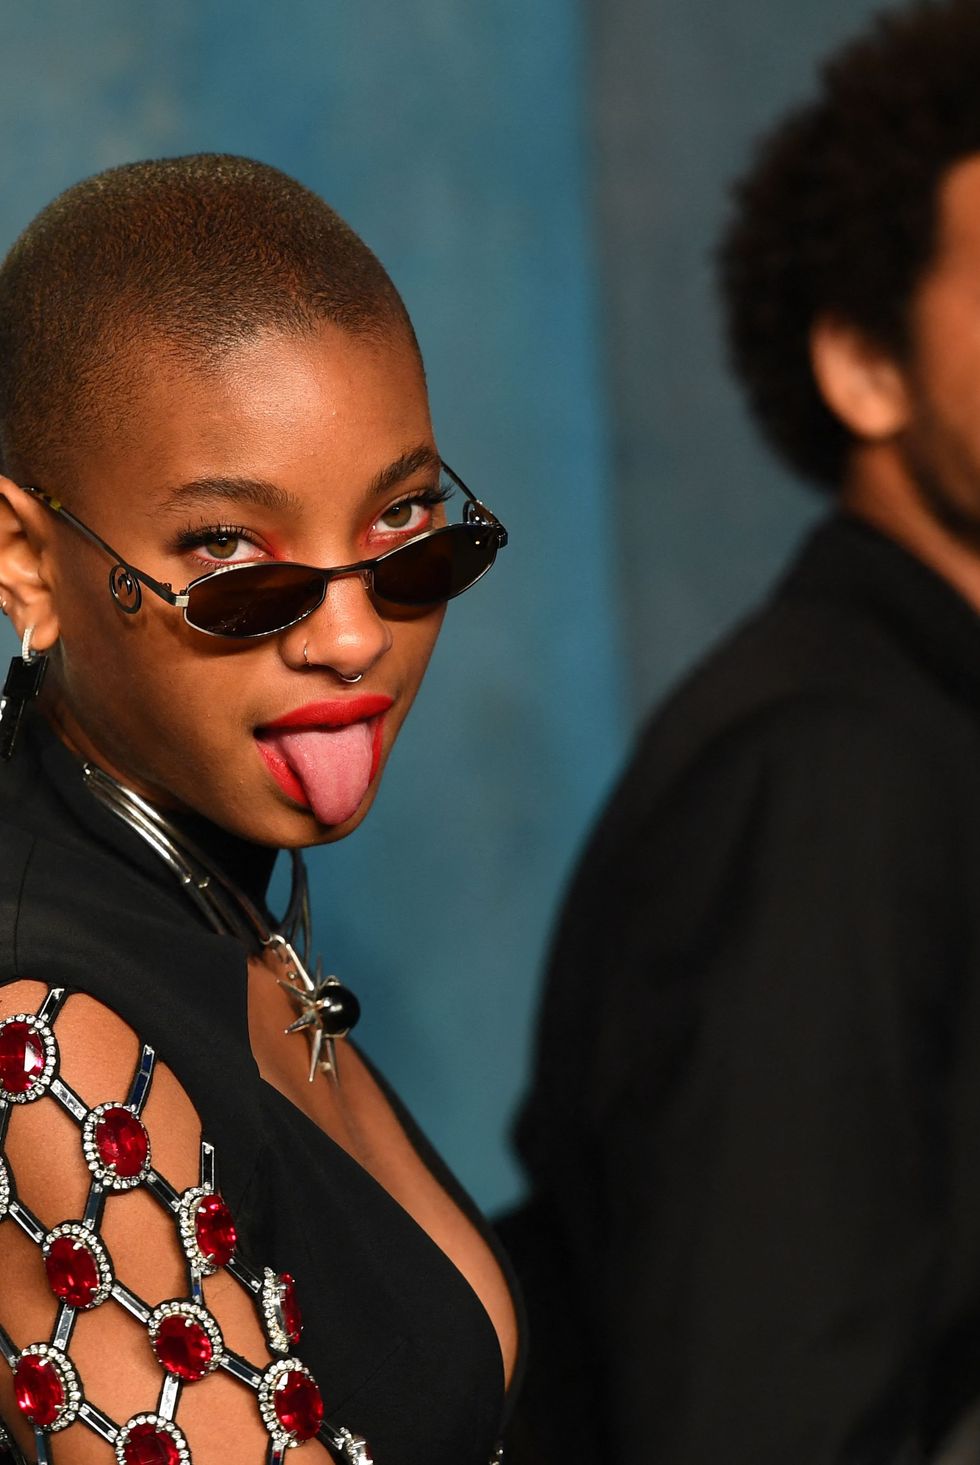 Willow Smith Is Making Braided Sideburns a Thing. No, Really